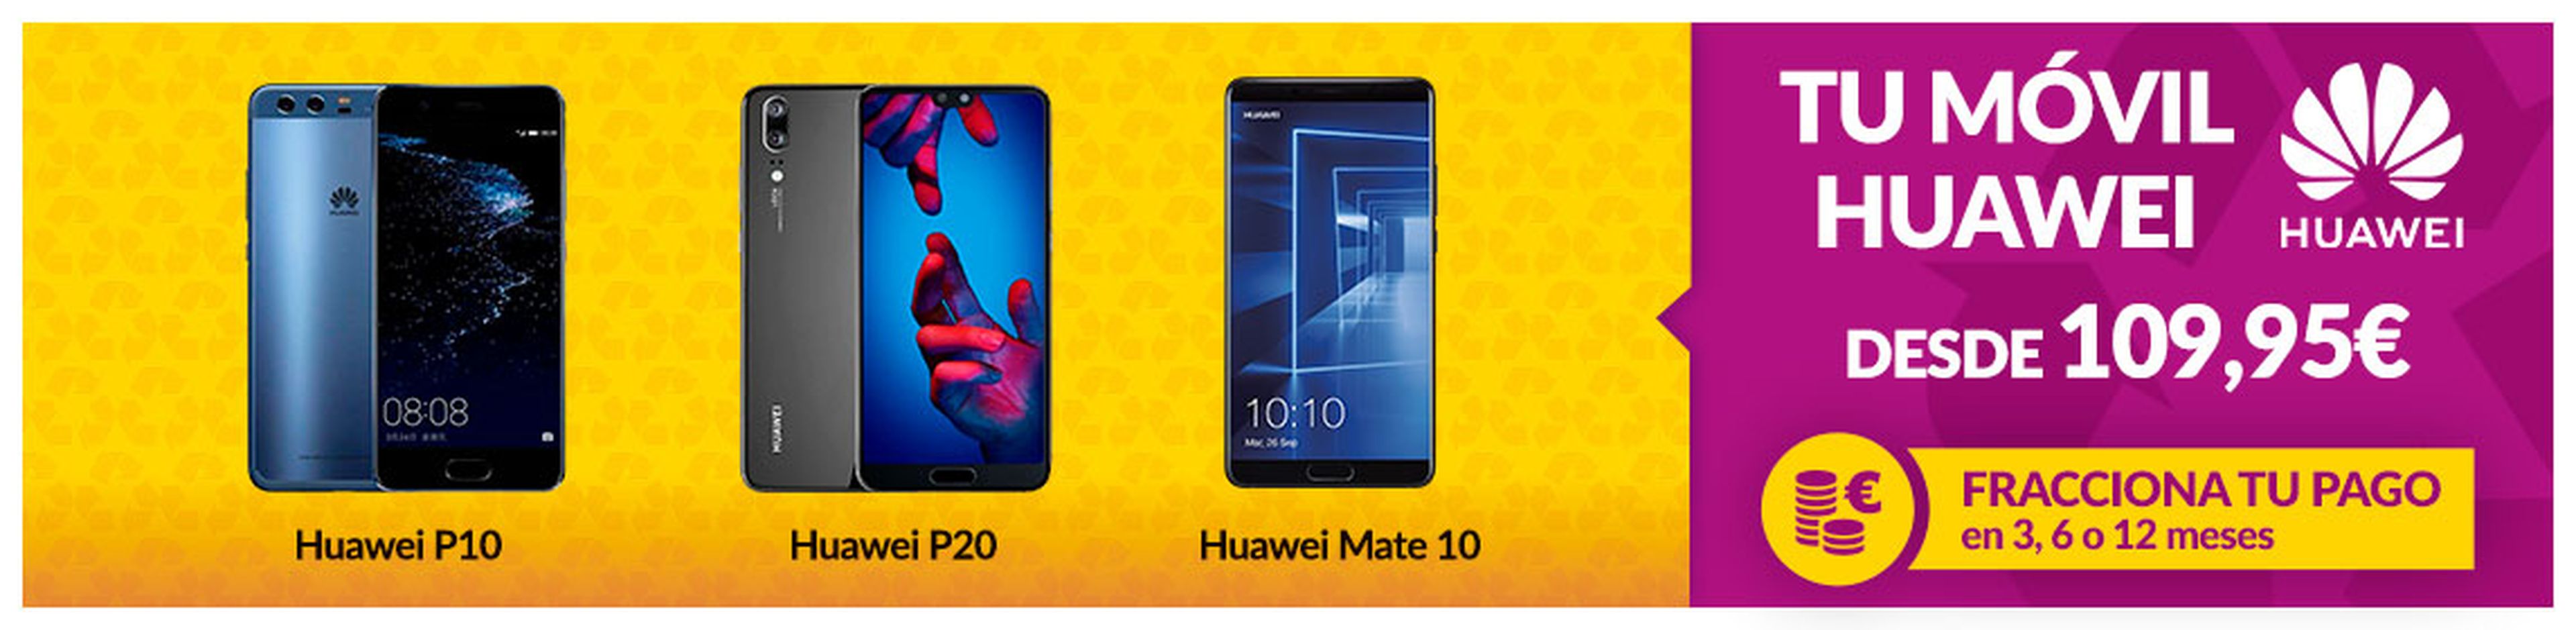 GAME PROMO MOVILES HUAWEI